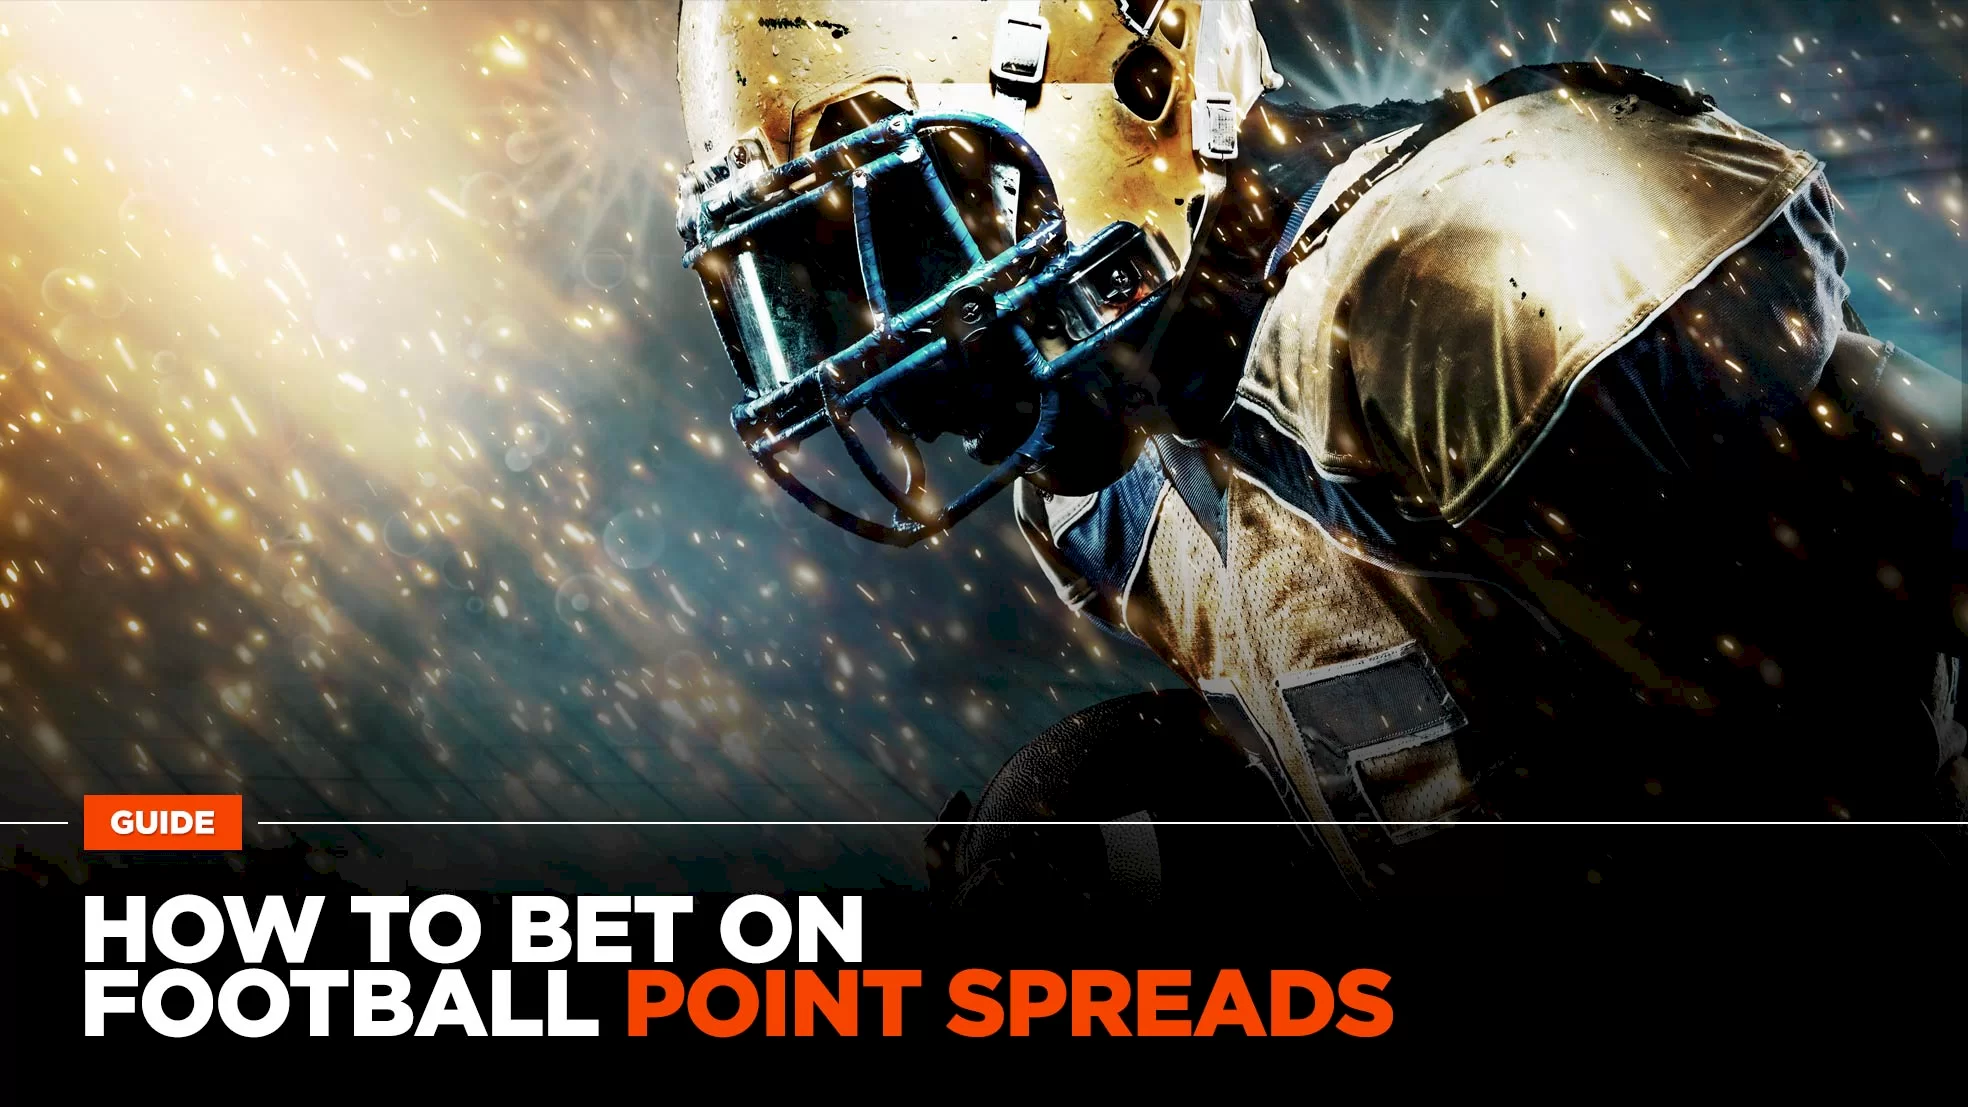 How to Bet on Football Point Spreads